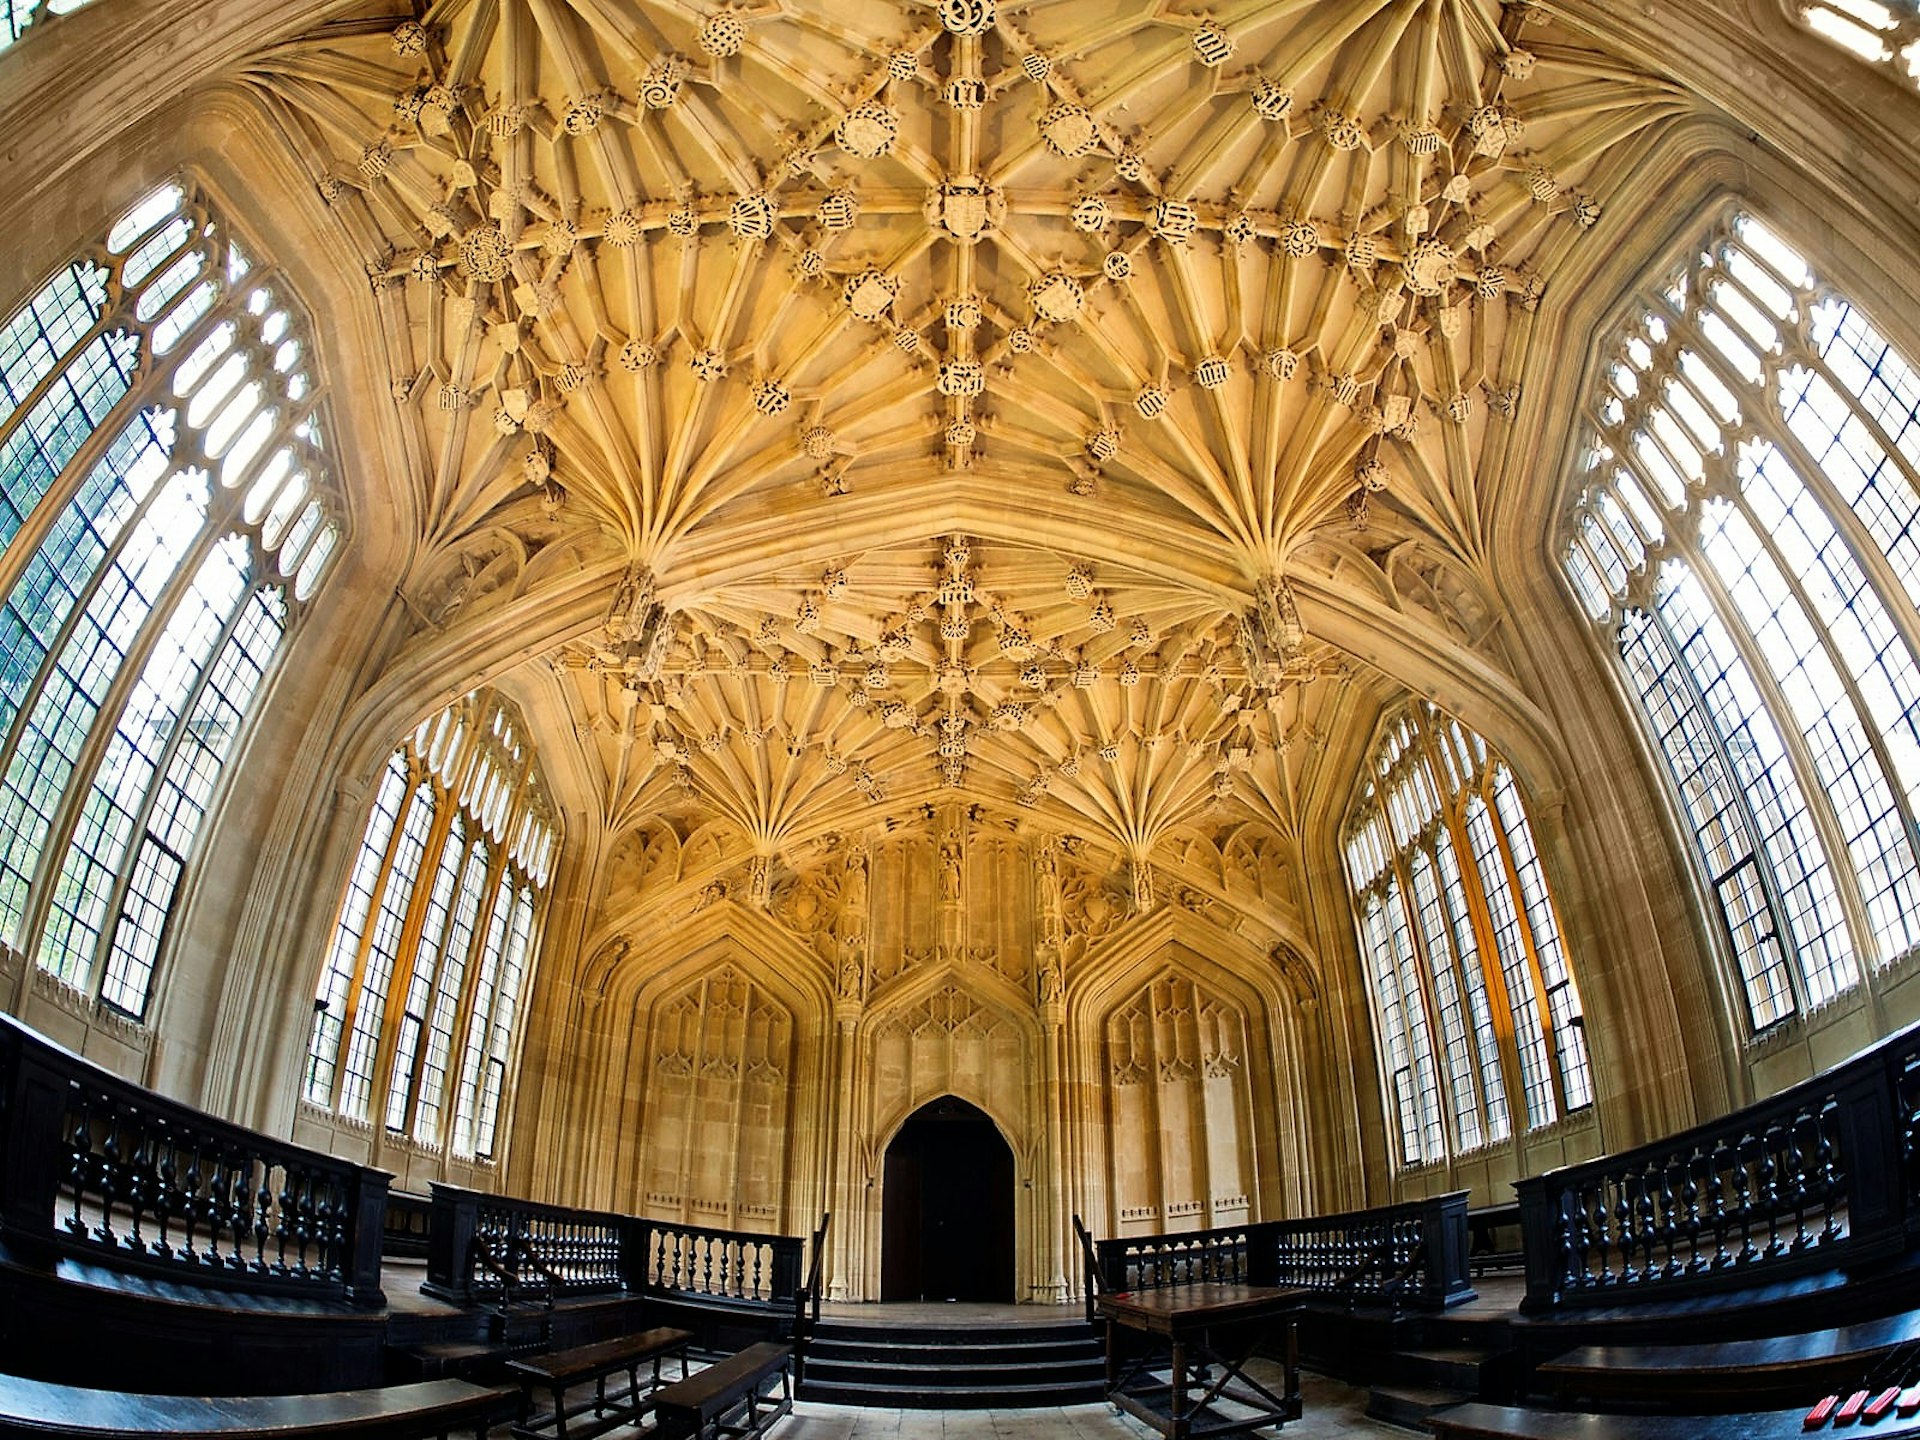 The medieval Divinity School in the Bodleian Library had a starring role in several Harry Potter movies © Jon Bower at Apexphotos / Getty Images